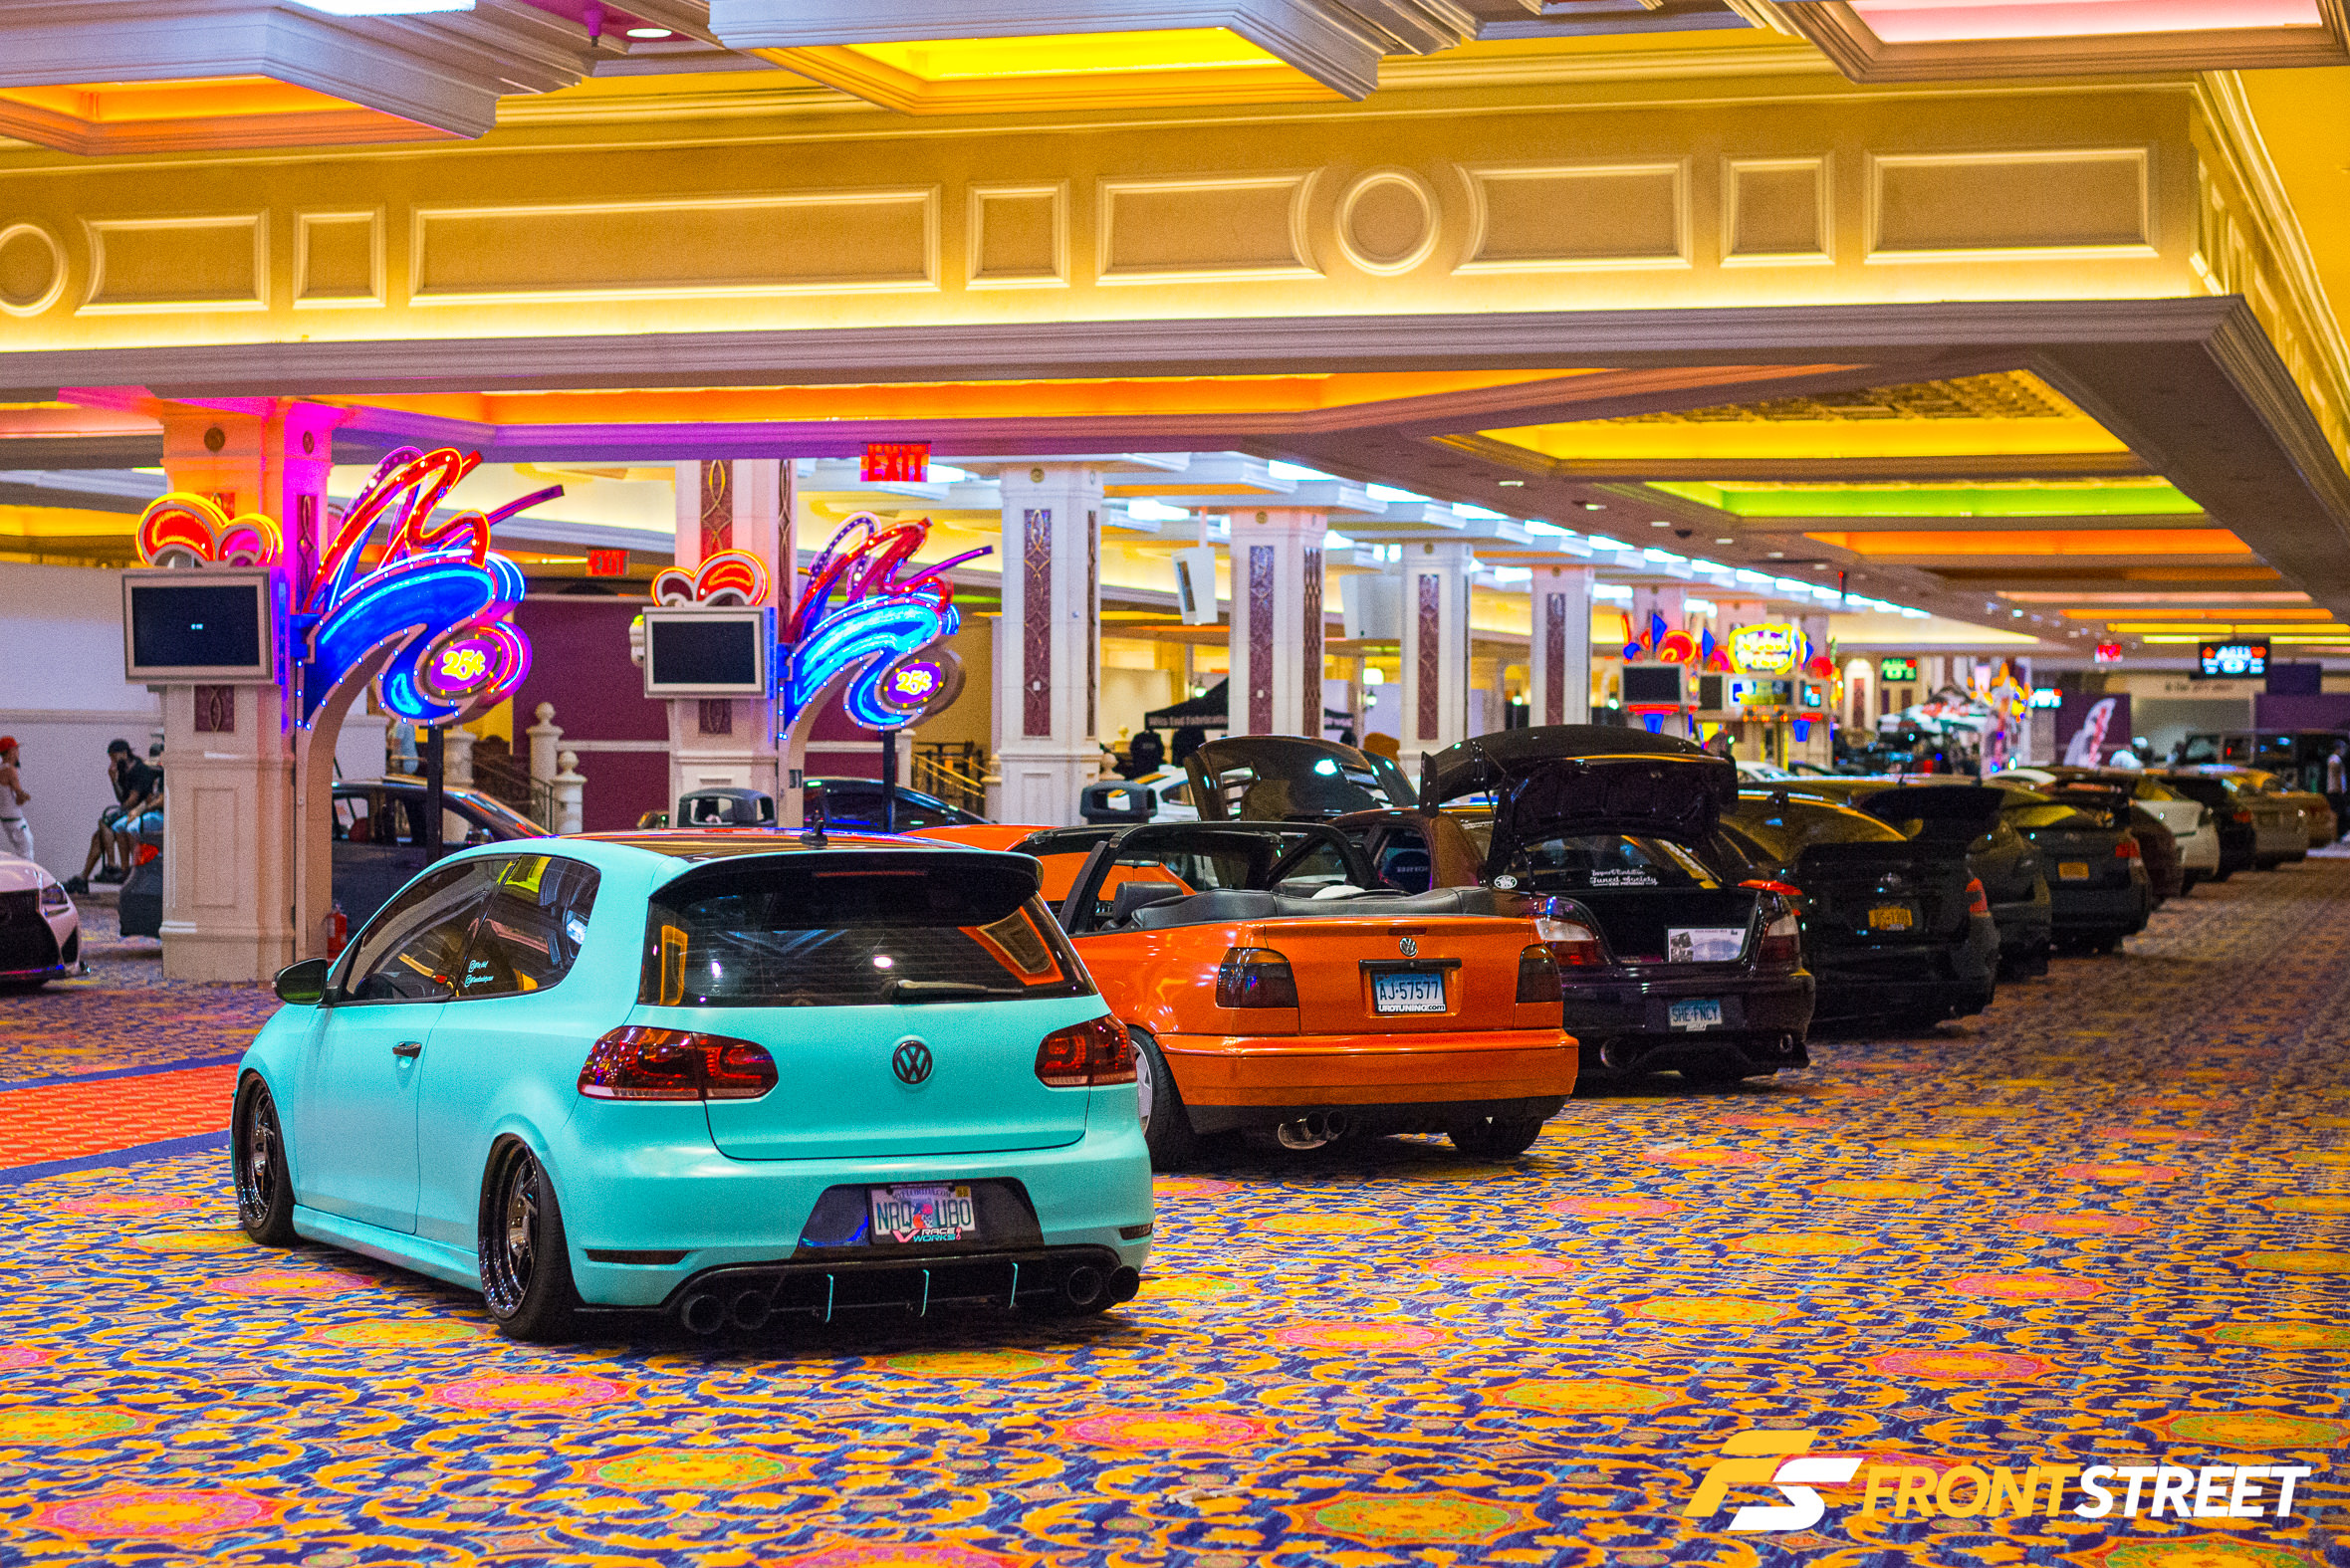 ACES 2020: An Unconventional Automotive Event Like No Other